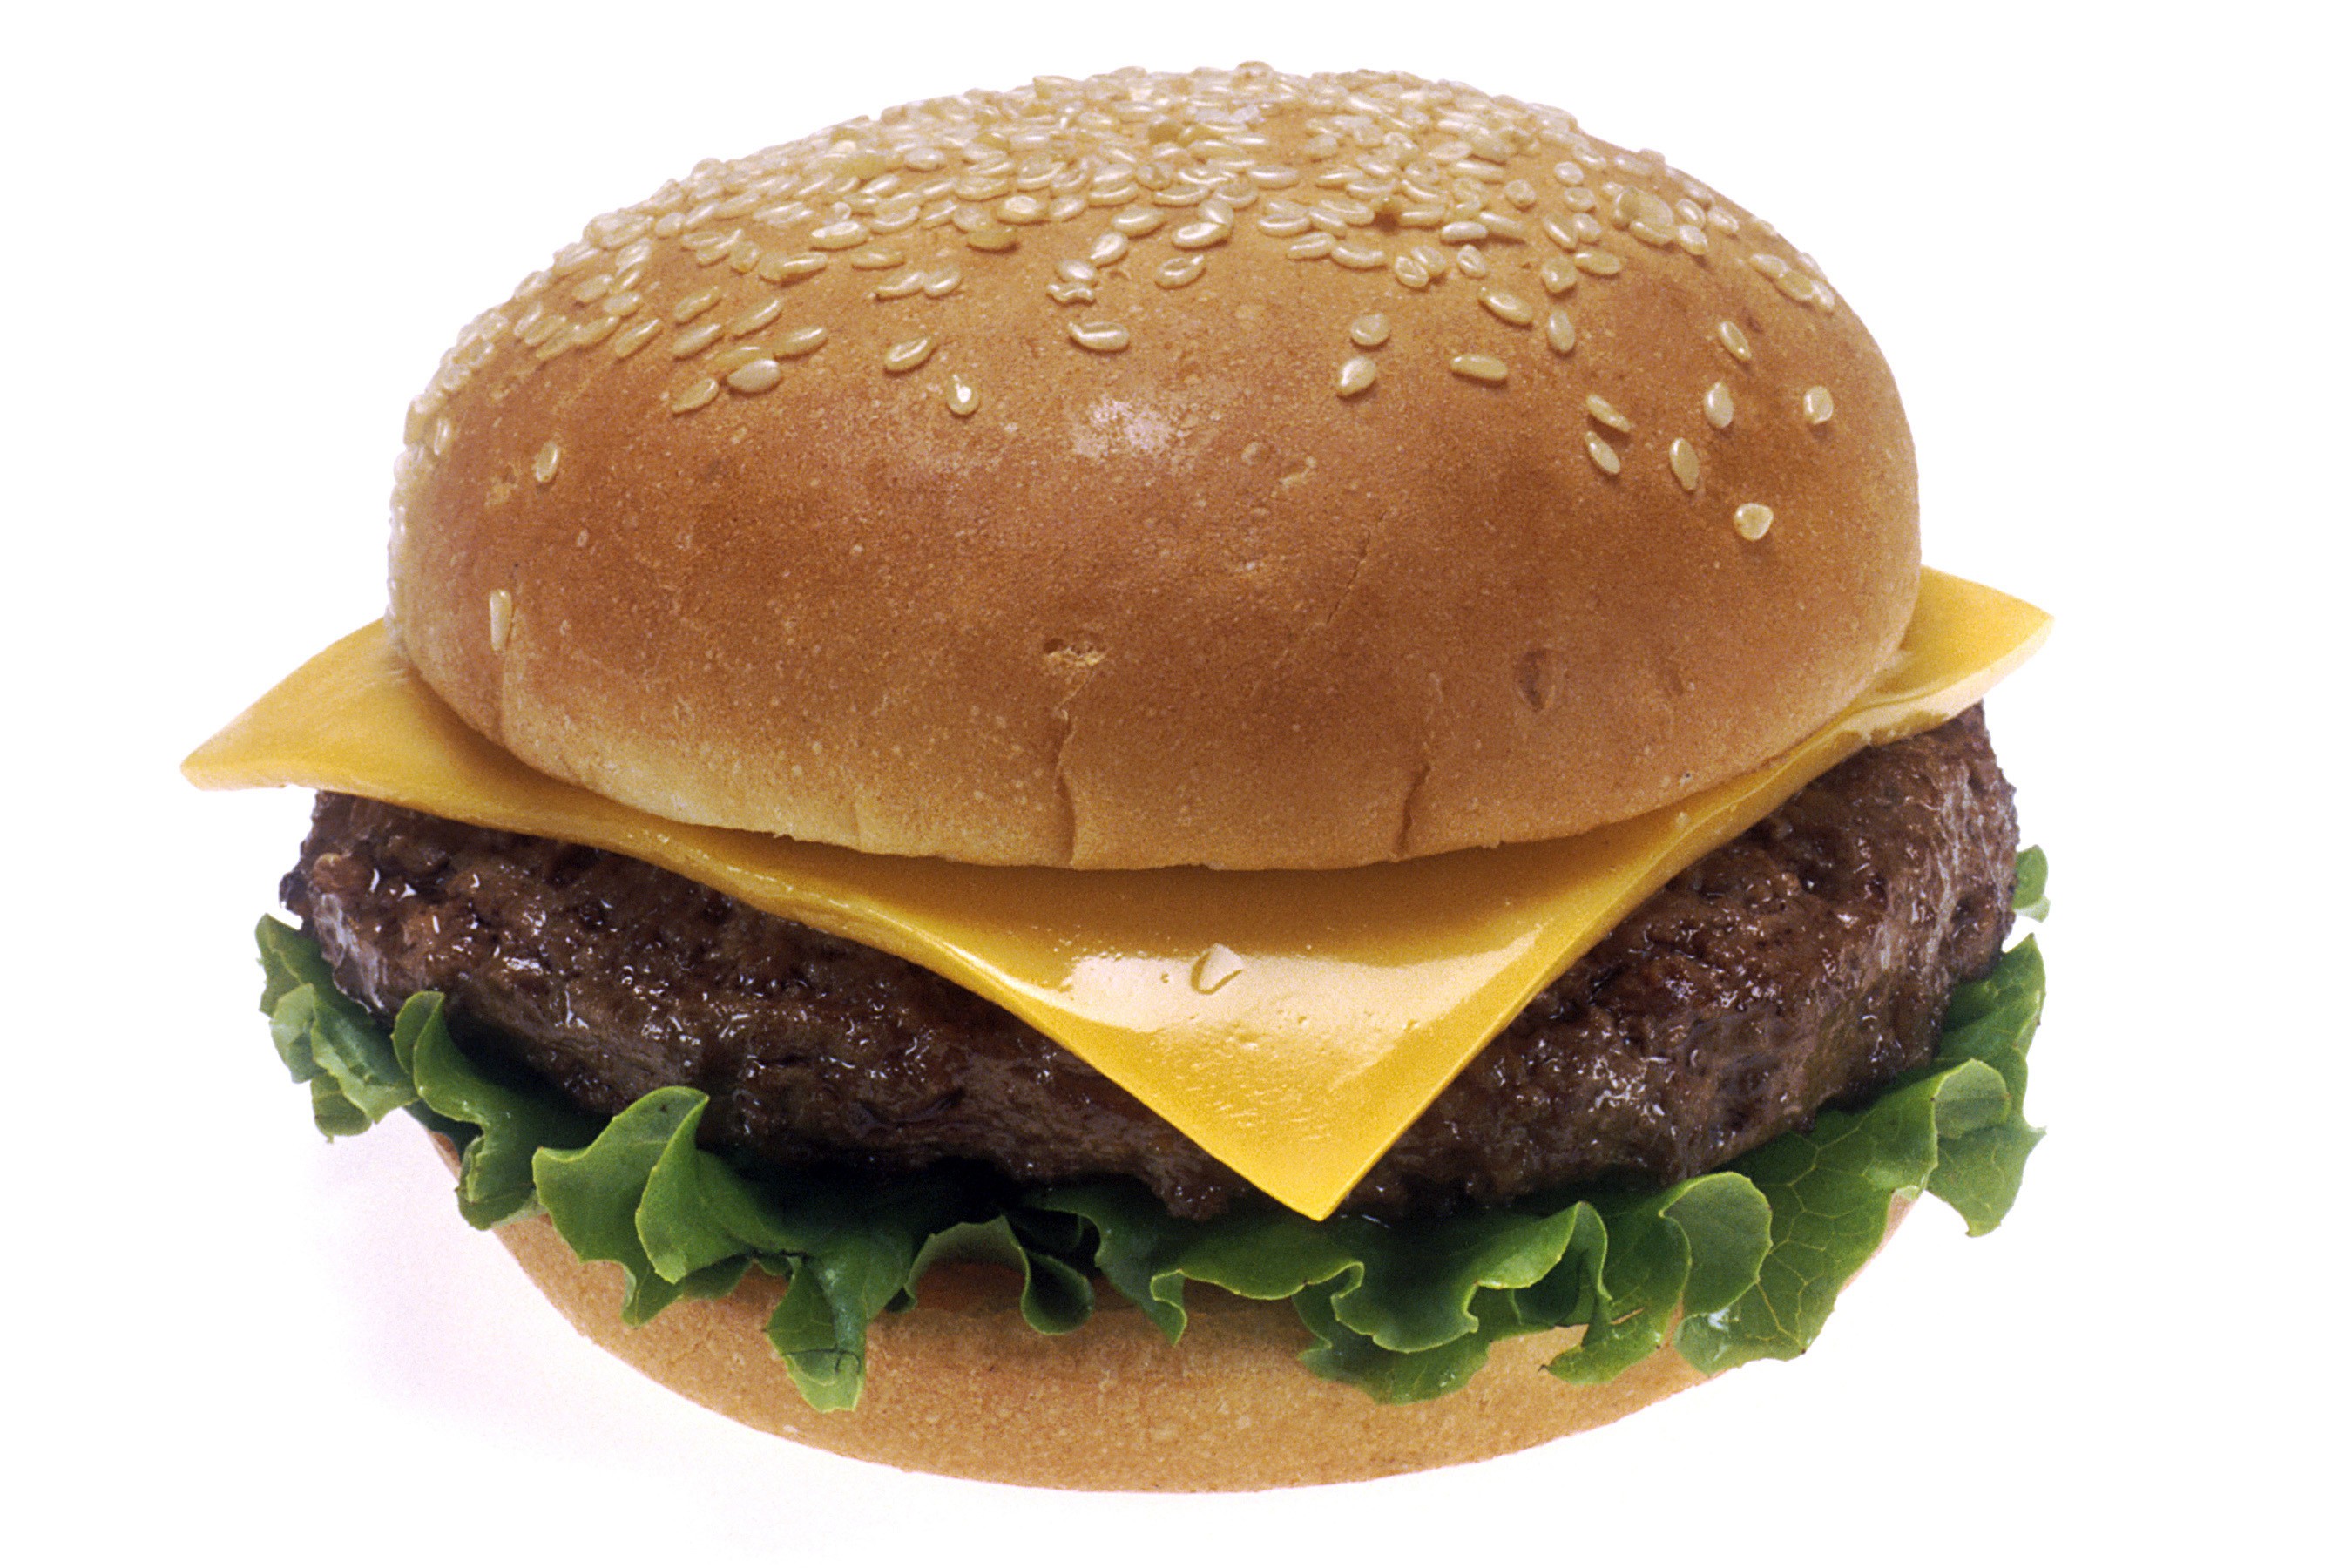 General 2700x1800 food simple background closeup white background burgers cheese meat lettuce bread